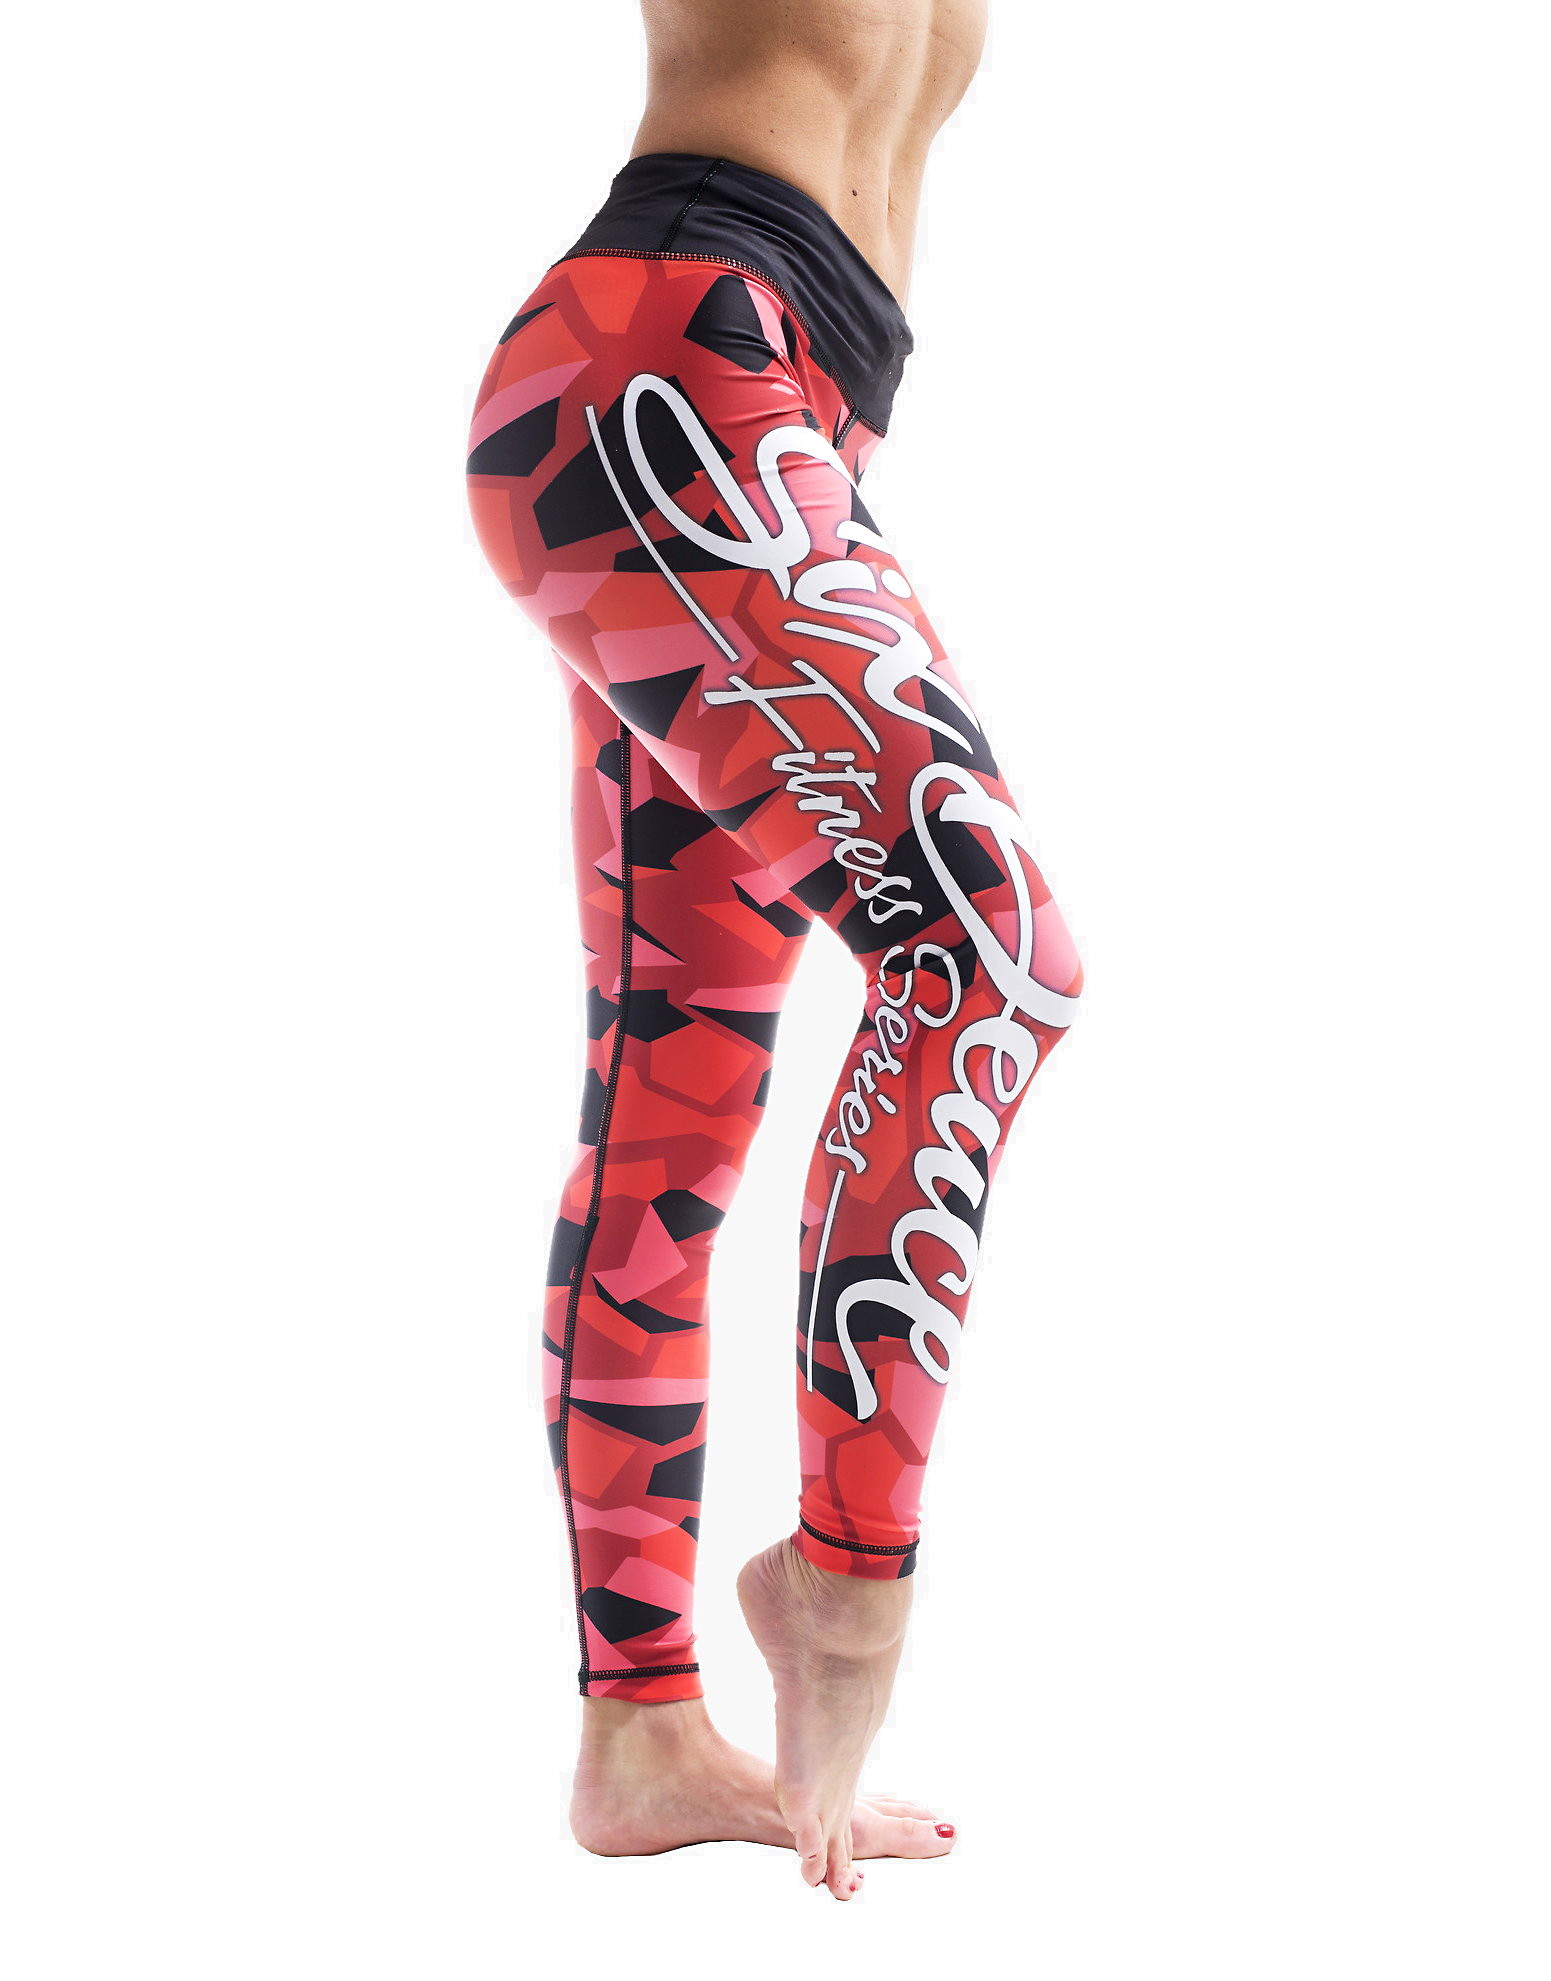 Red Bodybuilding Leggings  International Society of Precision Agriculture